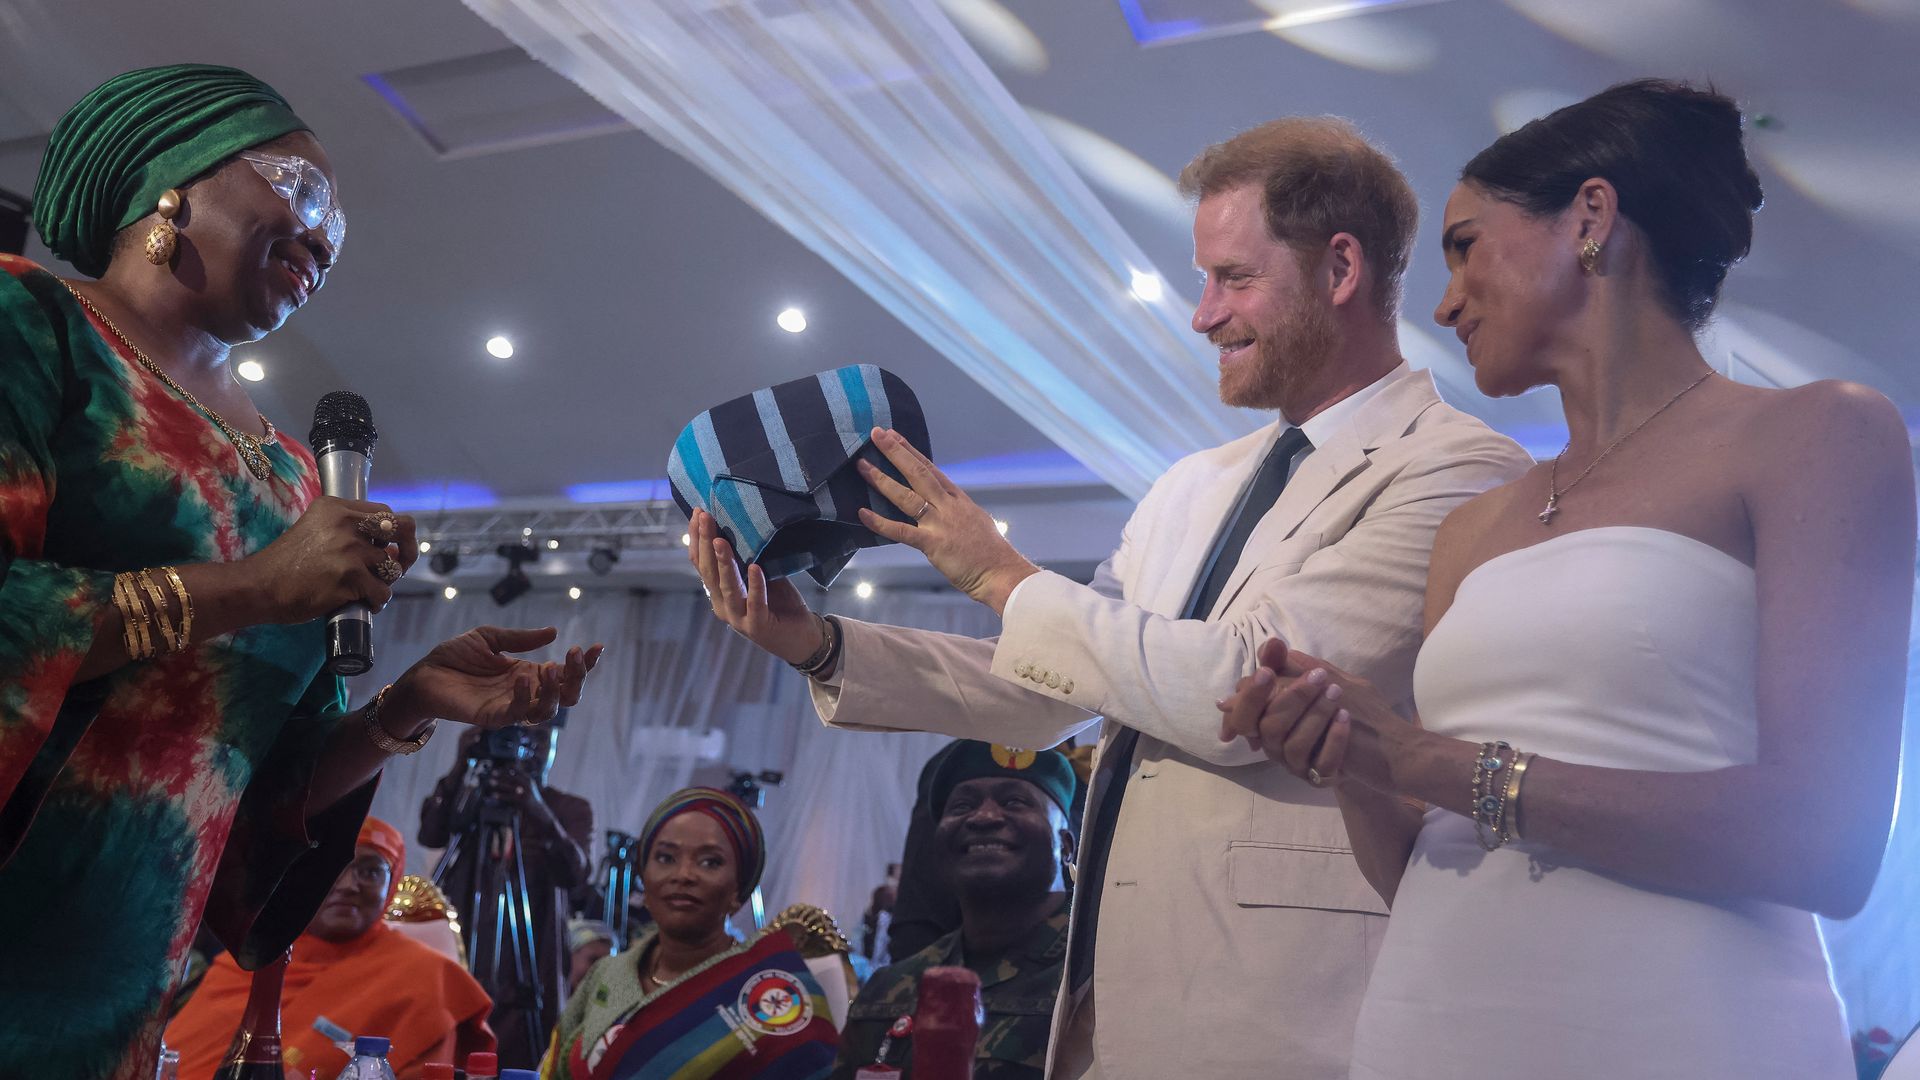 Prince Harry and Meghan Markle receive a traditional outfit made in Nigeria as they attend lunch at the Nigerian Defence Headquarters in Abuja